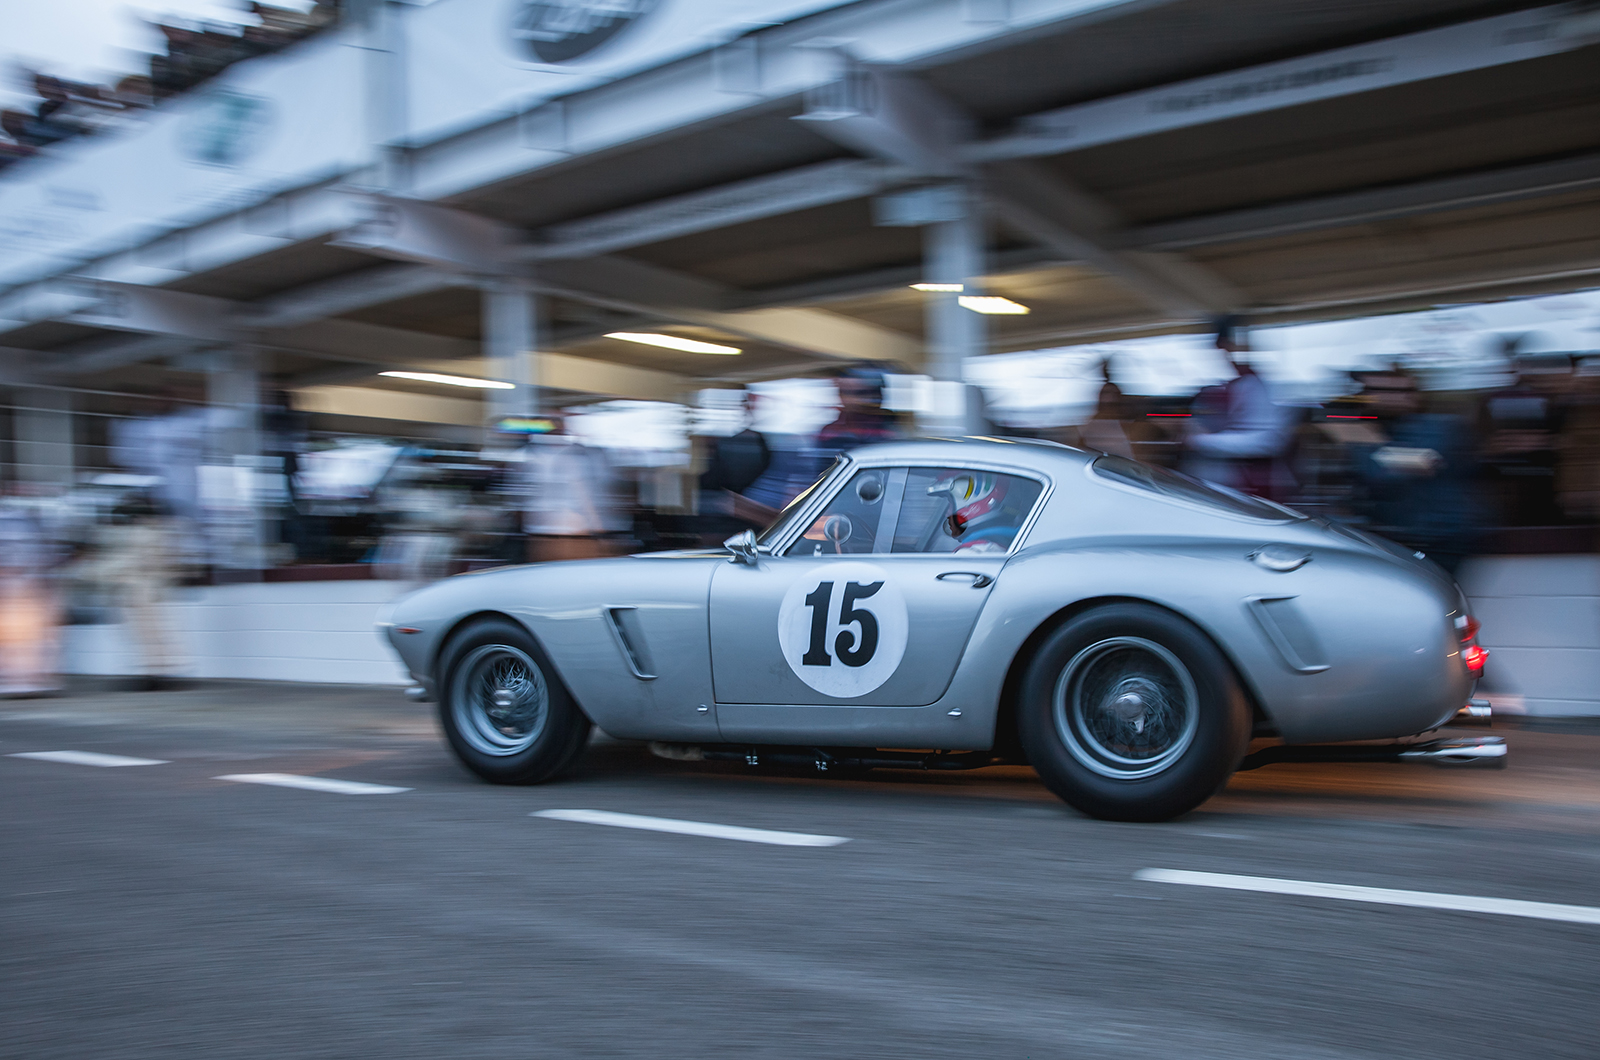 Classic & Sports Car – Who'll be the first winner at the 2018 Goodwood Revival?